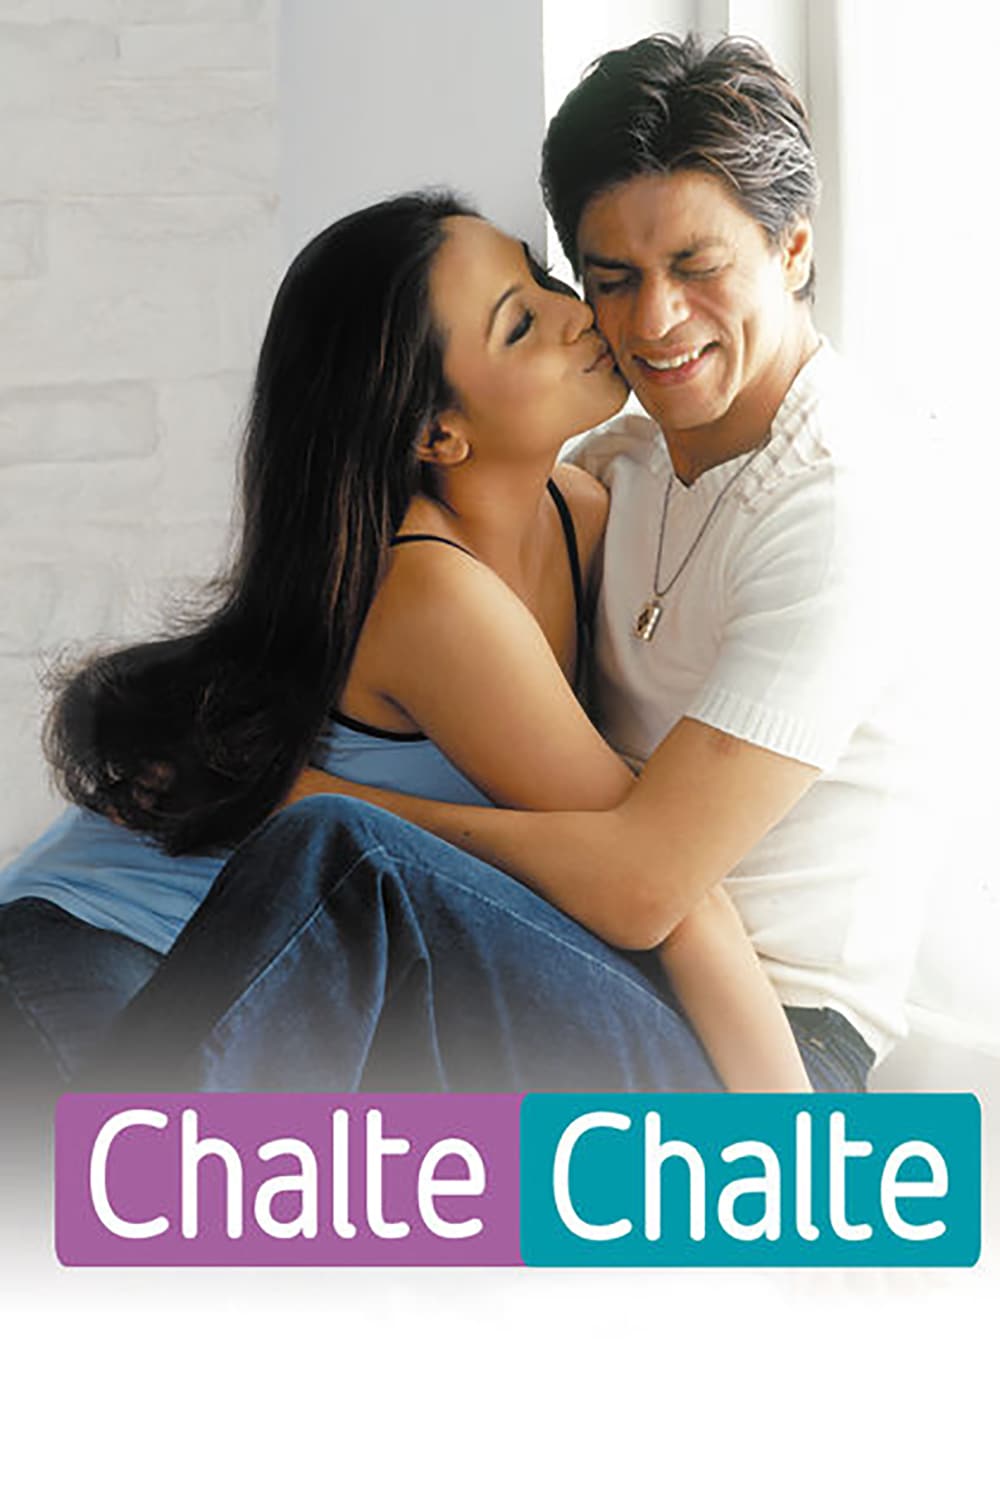 Poster for the movie "Chalte Chalte"